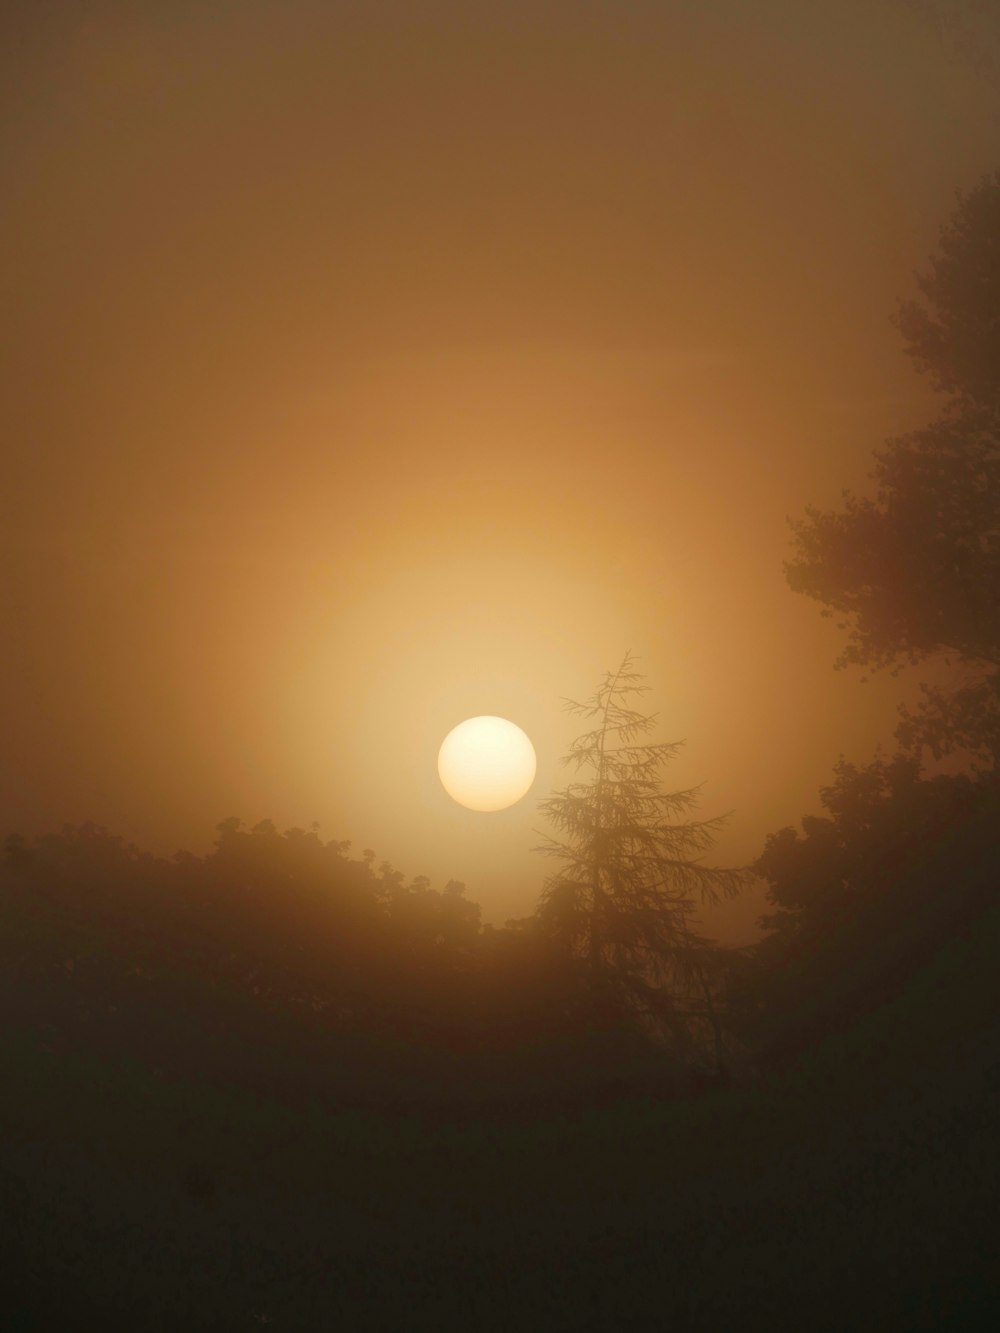 the sun is setting over a foggy forest